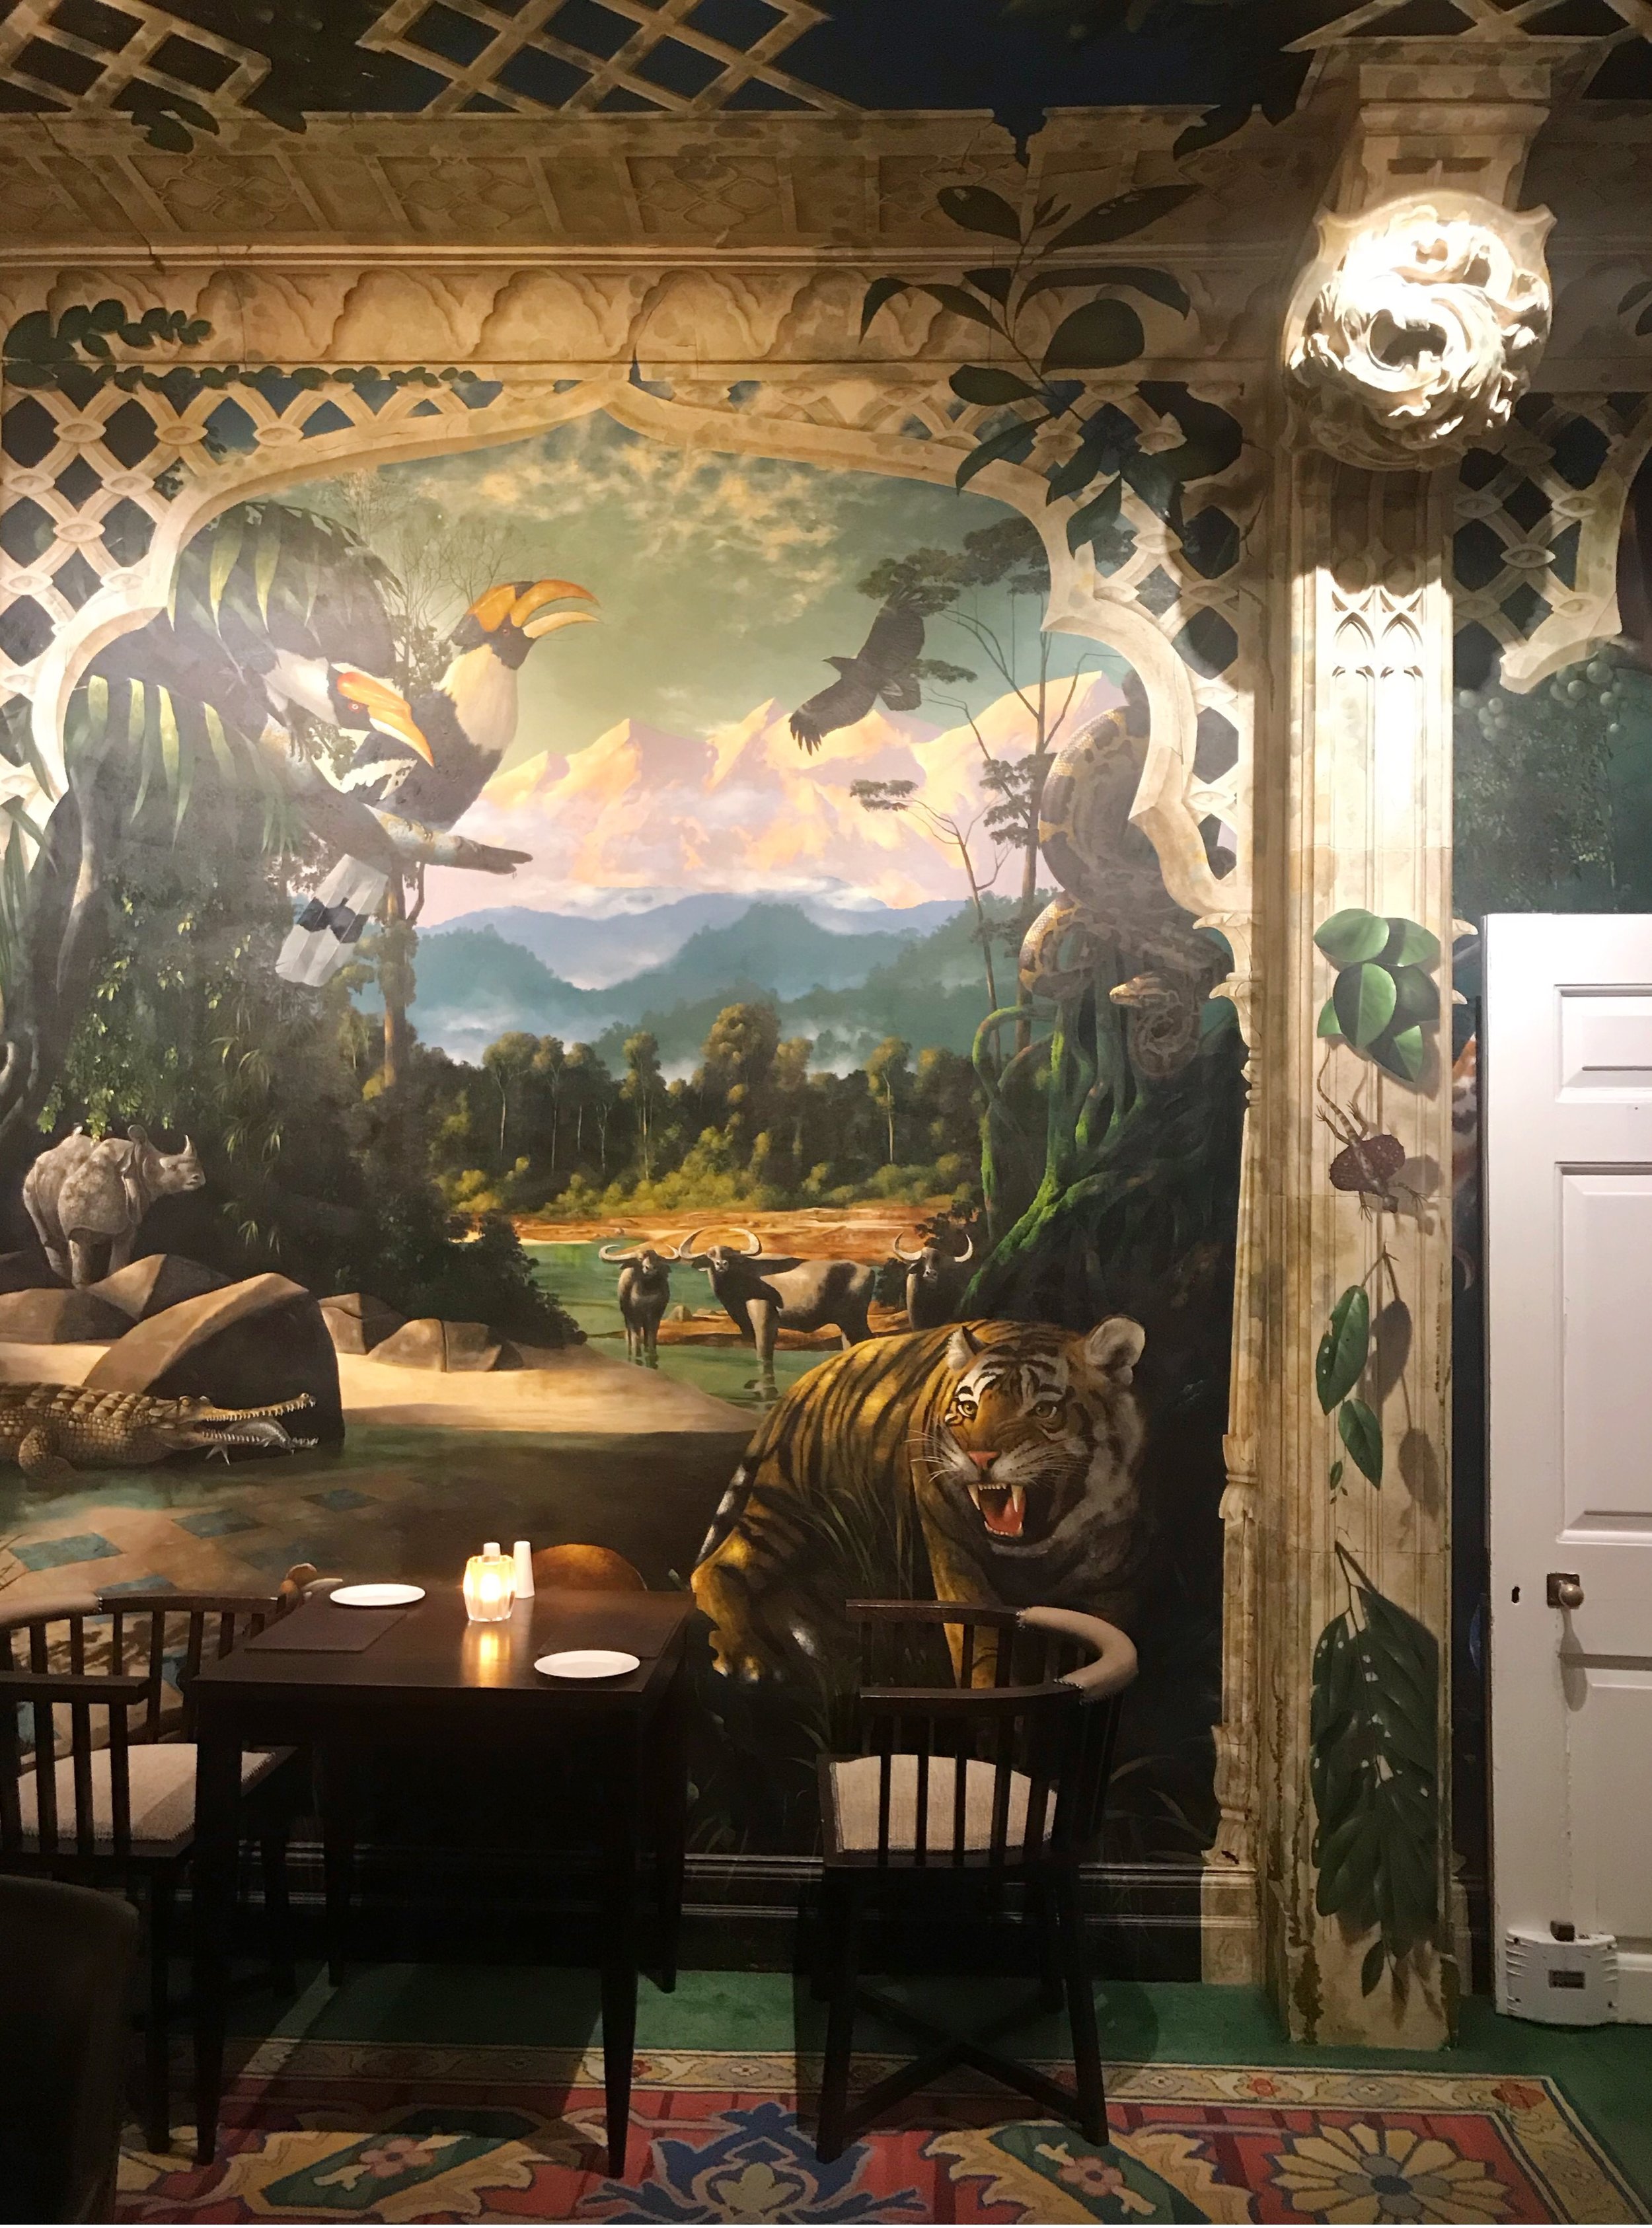 The paintings on the dining room walls move if you look for long enough